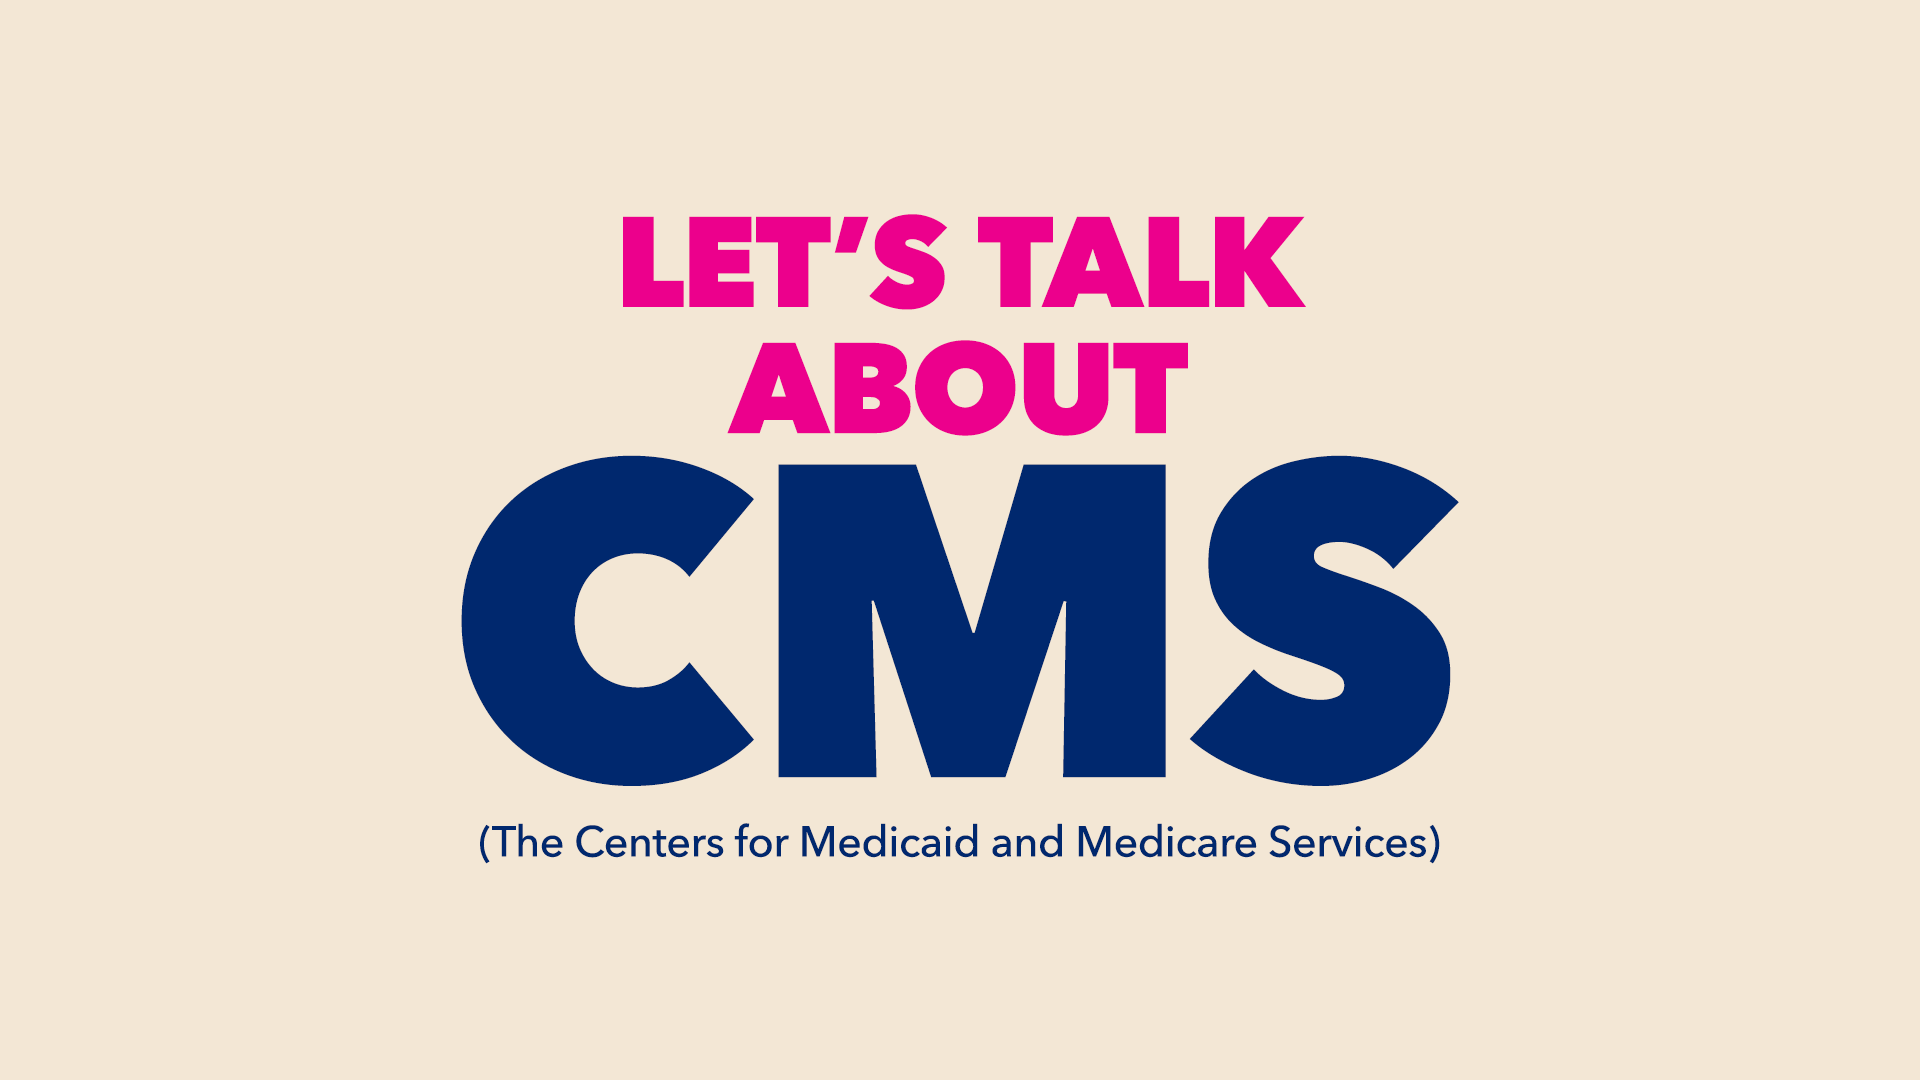 Main role of the centers for medicare and medicaid services conduent employee hr portal